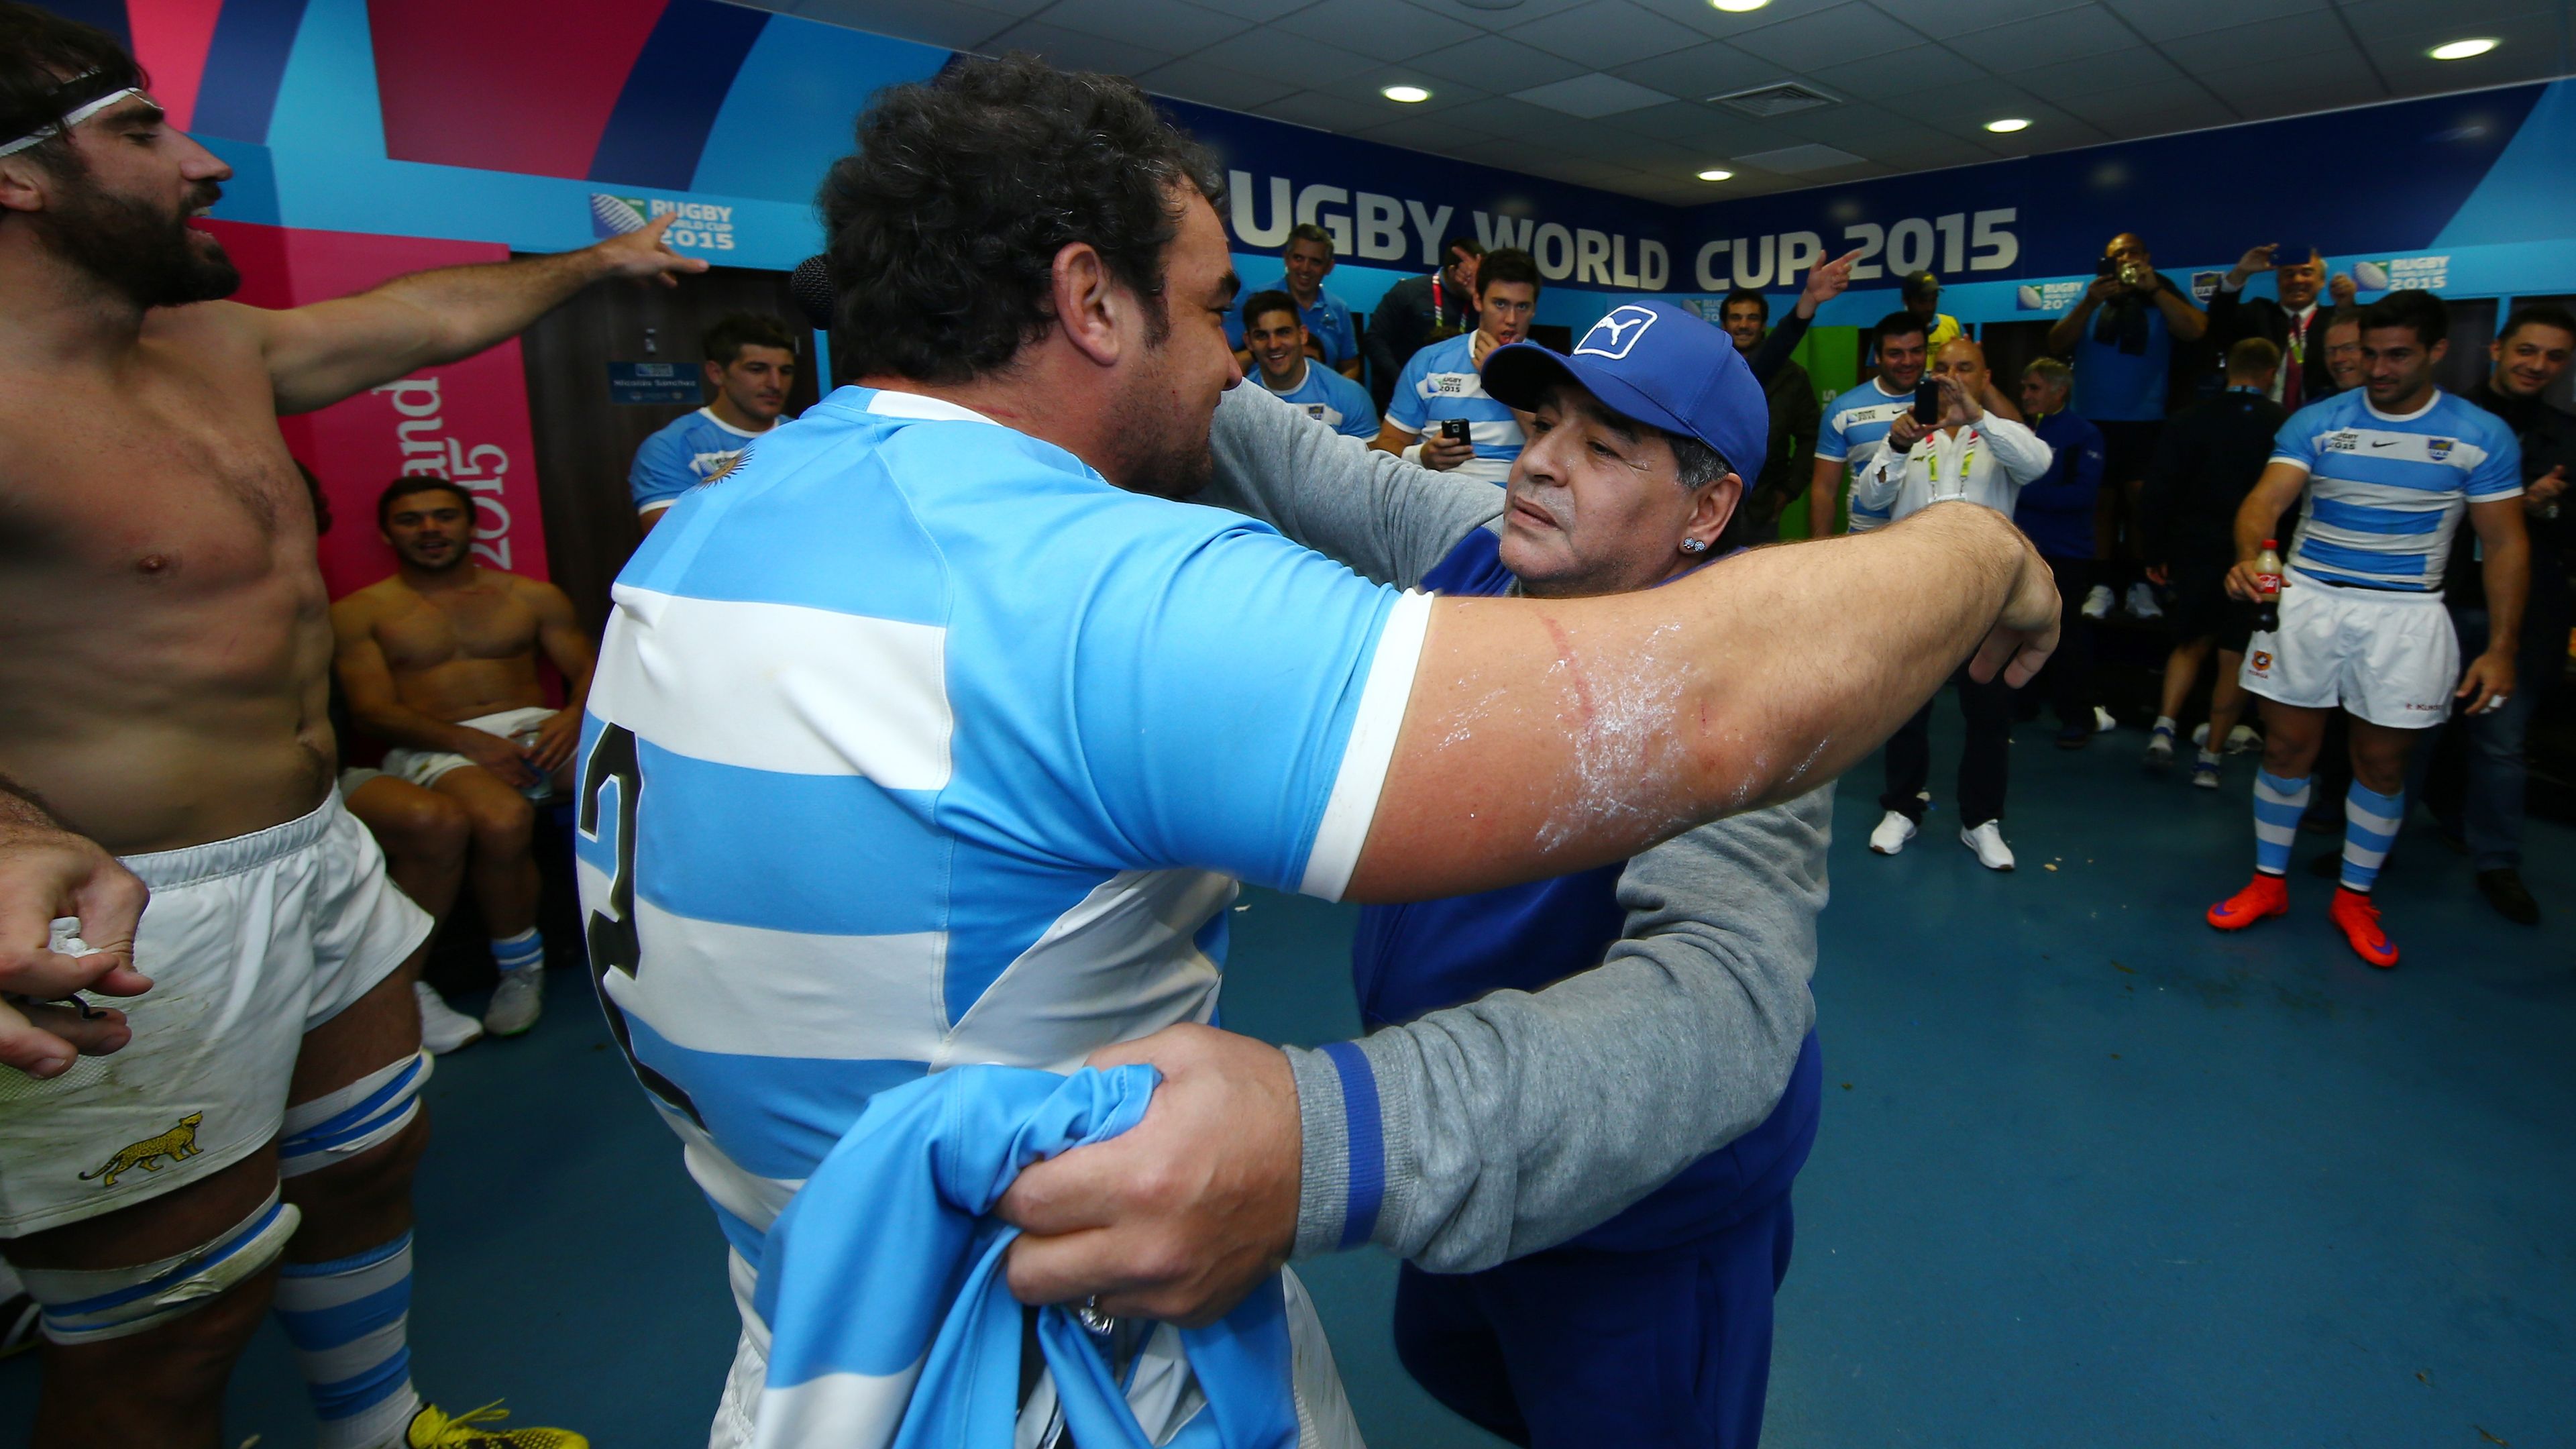 Diego Maradona embraces Argentina captain Agustin Creevy at the 2015 Rugby World Cup.